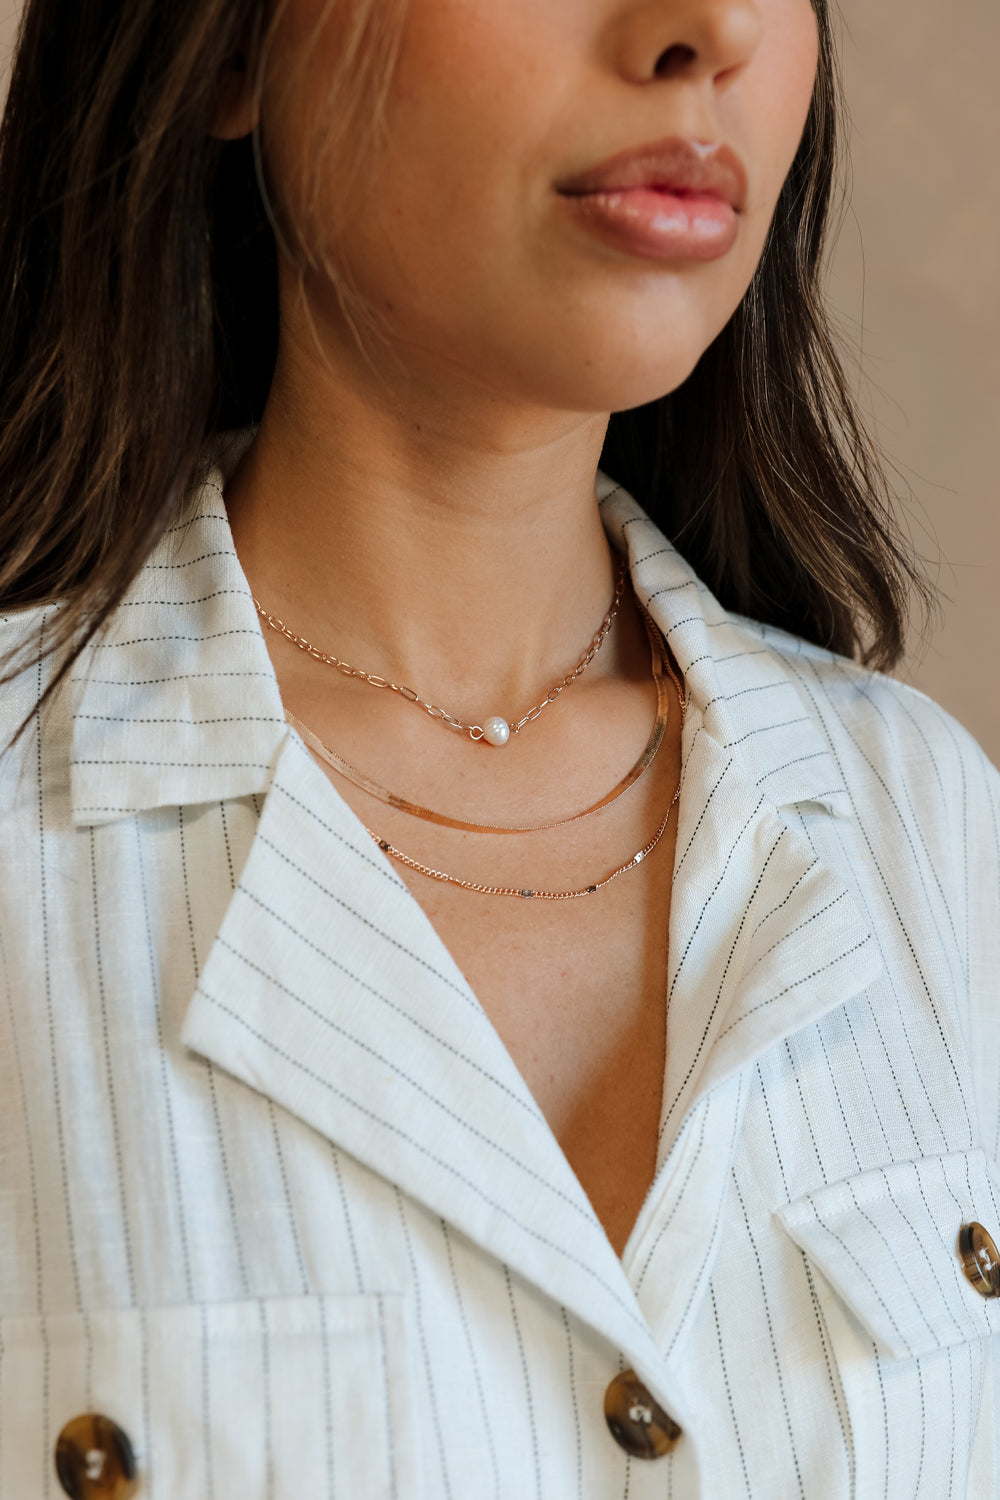 Close-up front view of model's neck; model is wearing the Madelyn Gold & Pearl Layered Necklace that has 3 varied gold chains with one pearl bead.